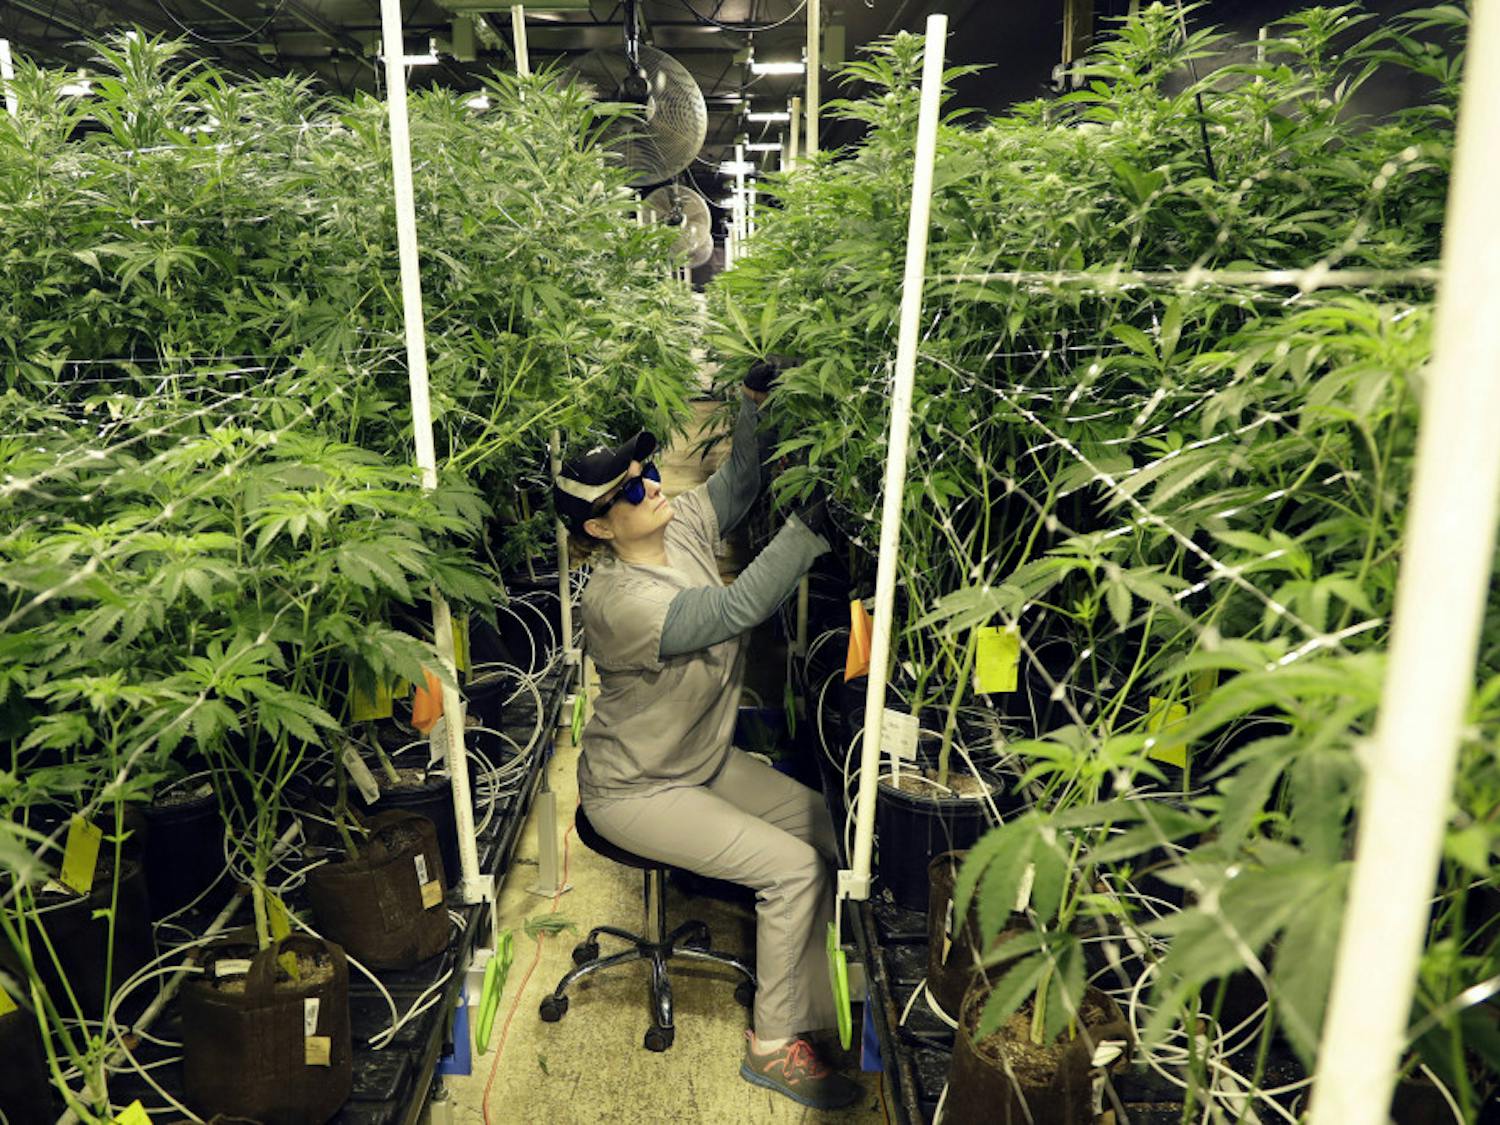 FILE - In this March 22, 2019 file photo, Heather Randazzo, a grow employee at Compassionate Care Foundation's medical marijuana dispensary, trims leaves off marijuana plants in the company's grow house in Egg Harbor Township, N.J. New Jersey legislative leaders unveiled a proposed ballot question Monday, Nov. 18, that would ask voters whether the state should legalize recreational marijuana. (AP Photo/Julio Cortez, File)